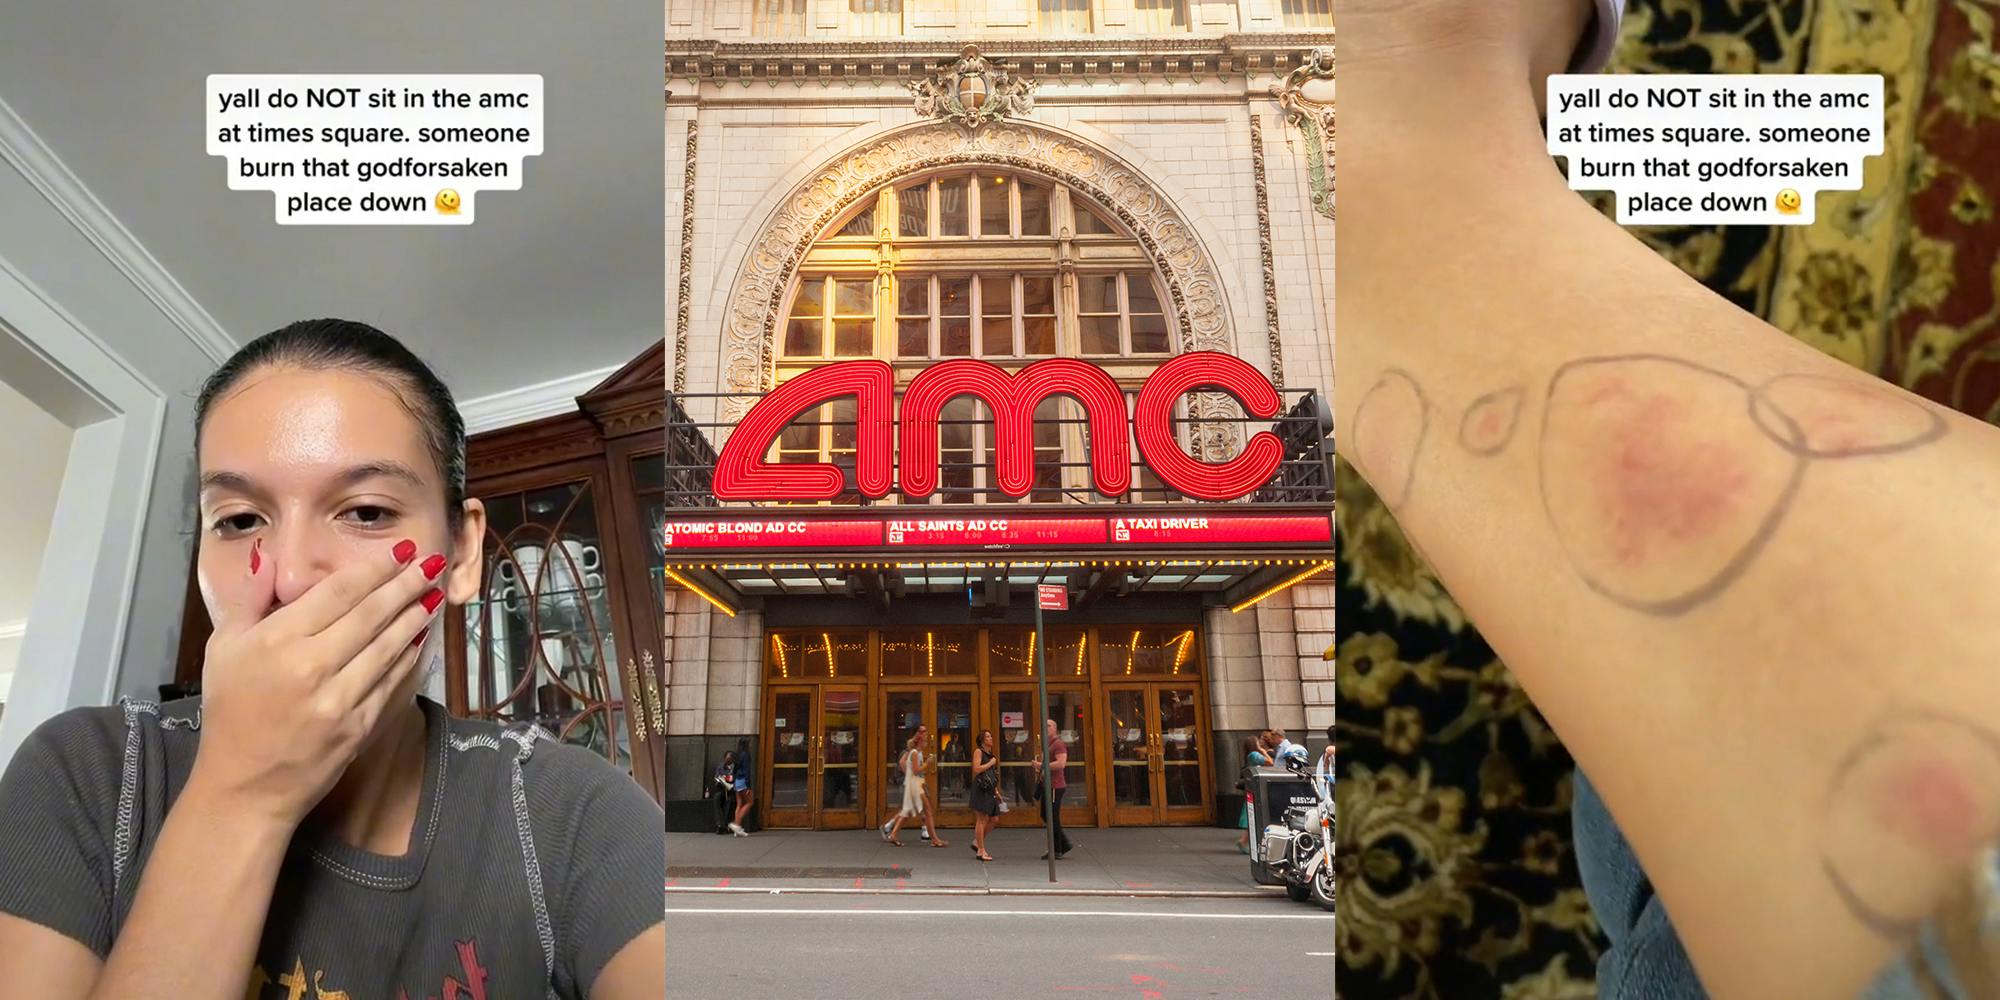 woman with mouth covered and caption "yall do NOT sit in the amc at times square, someone burn that godforsaken place down" (l) AMC theater in Times Square (c) leg with bites circled (r)